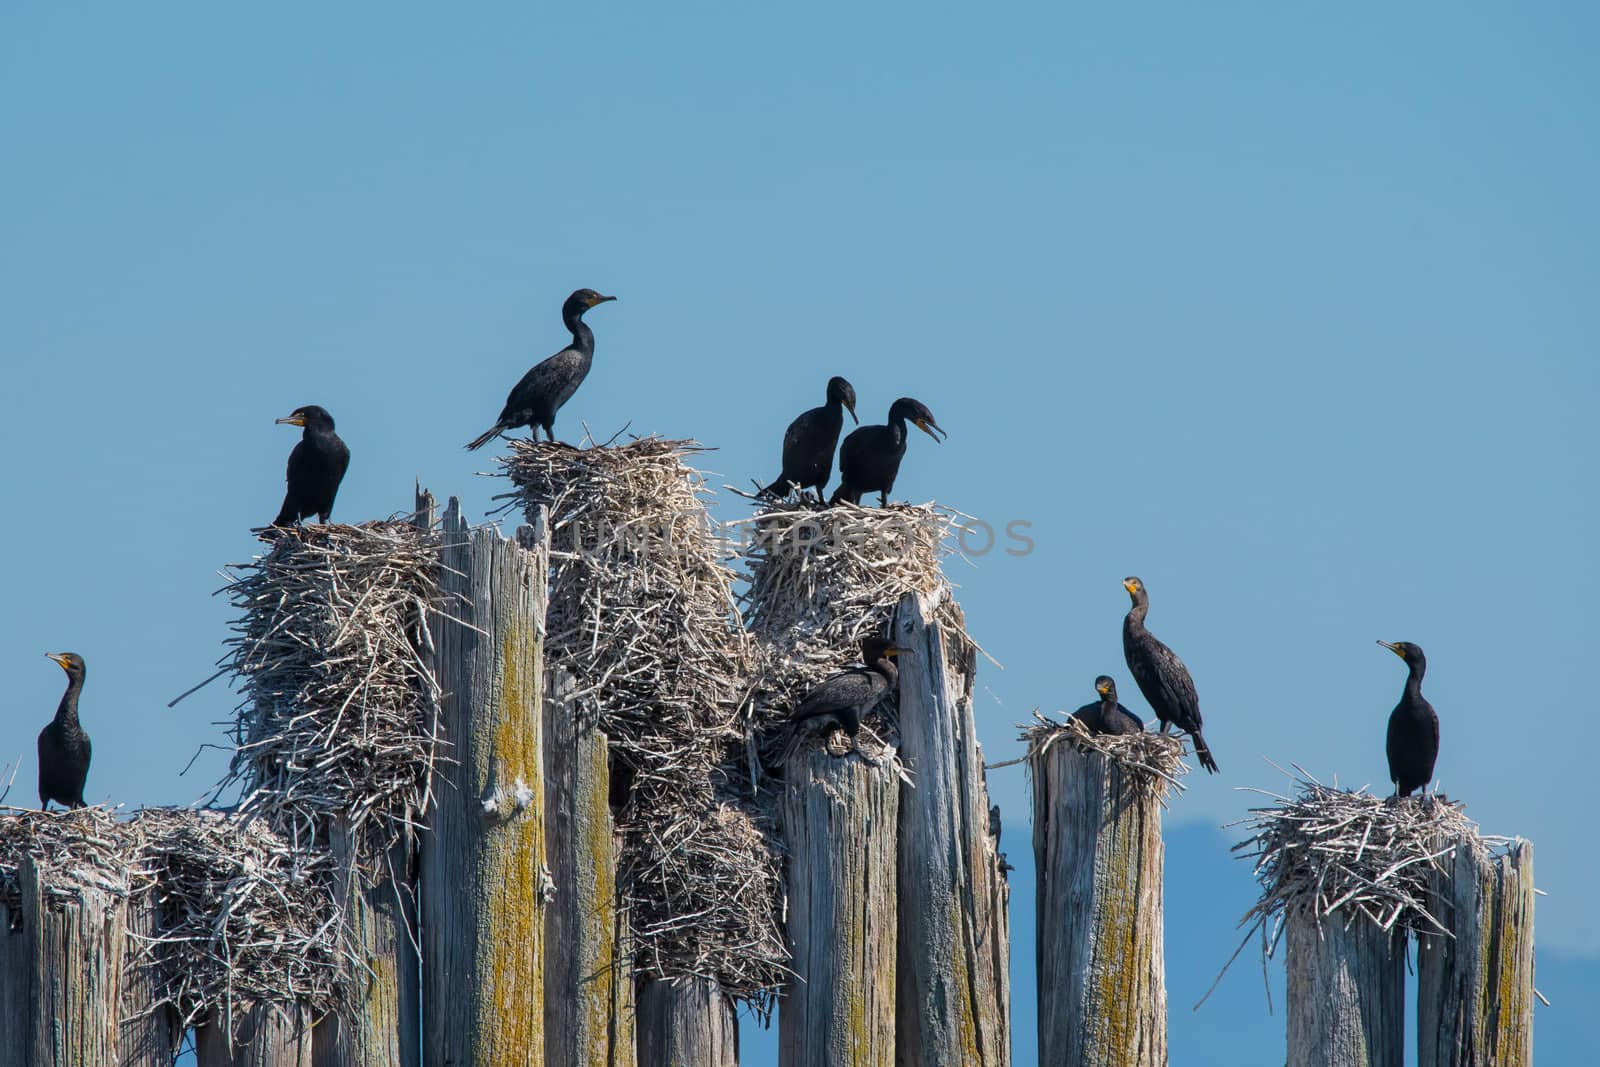 Cormorants on Pilings by cestes001